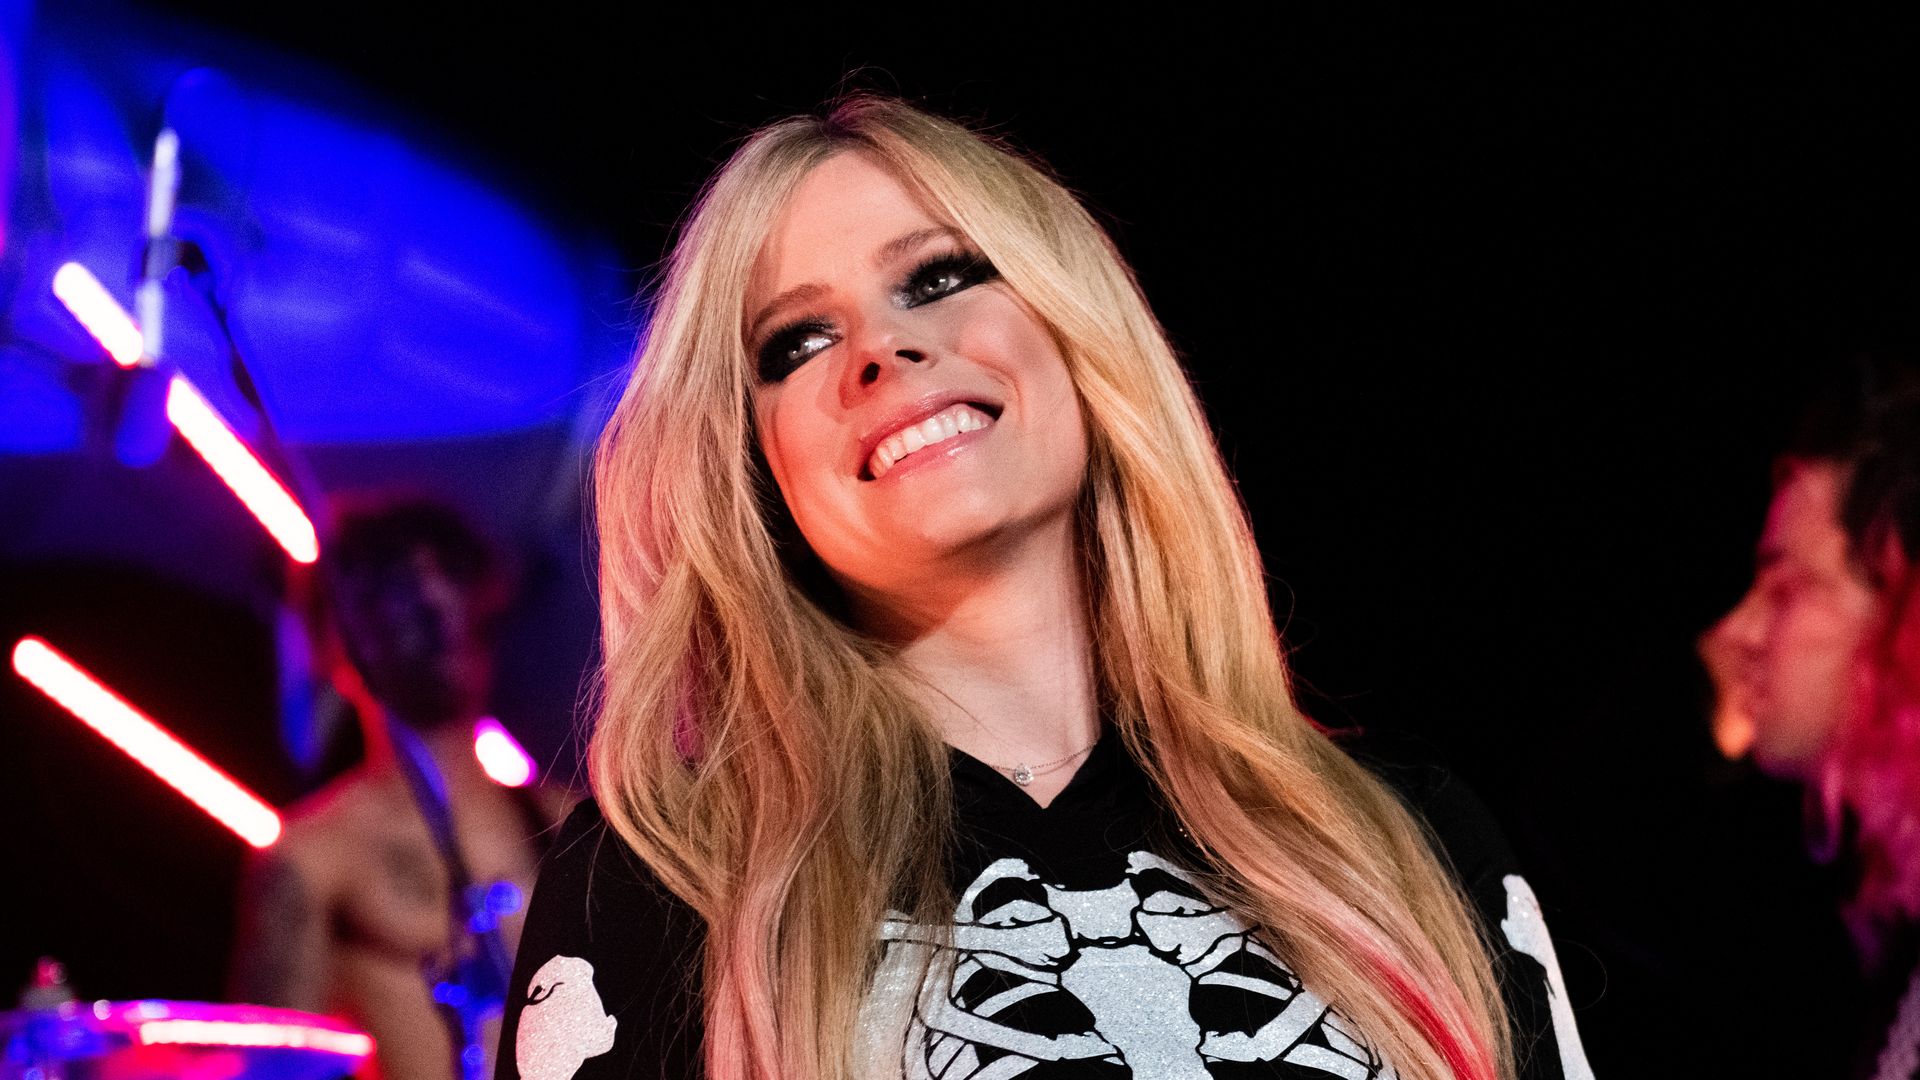 Avril Lavigne performs onstage during the NoCap x Travis Barker House of Horrors concert